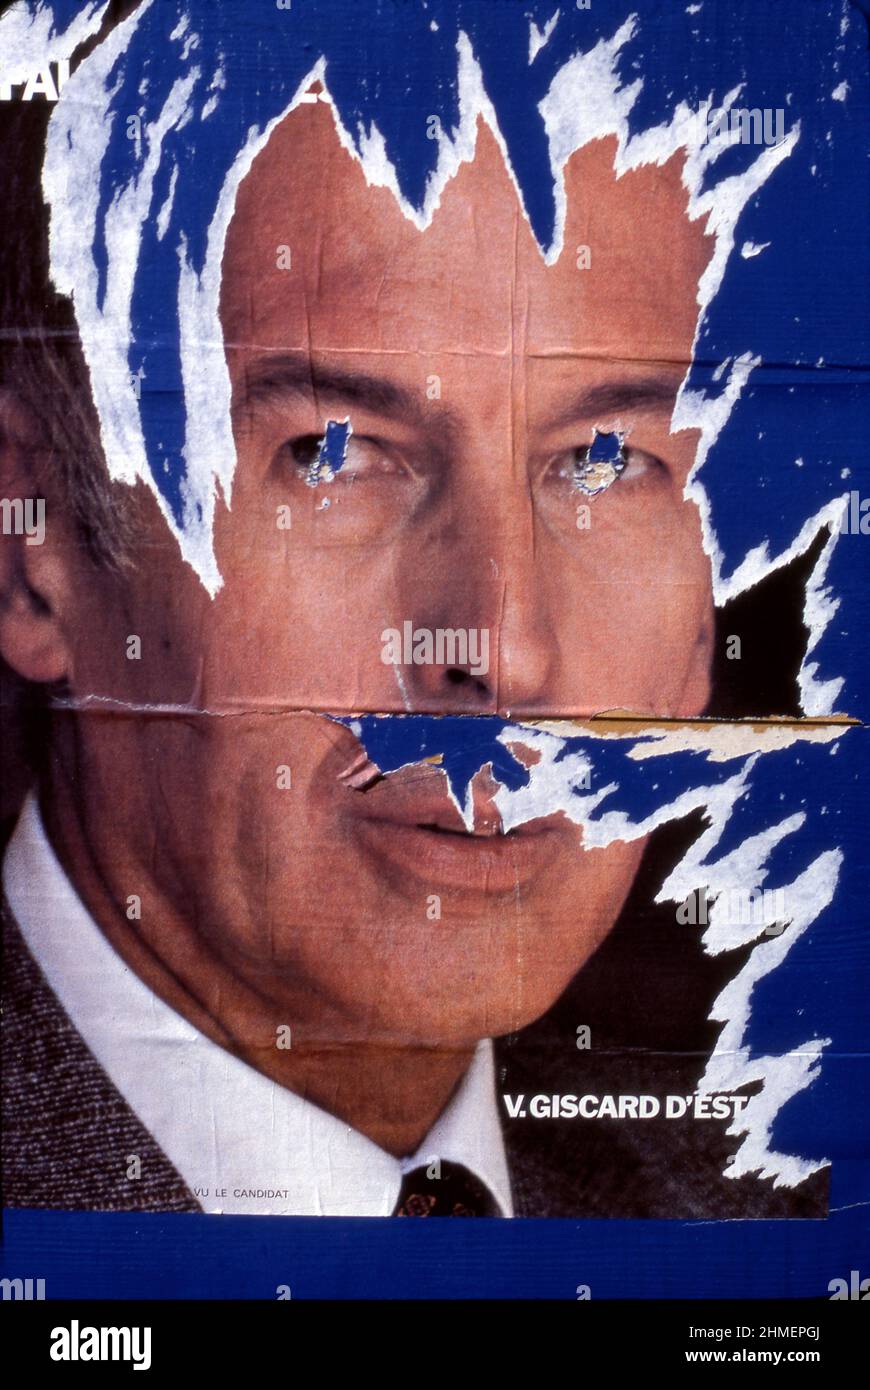 Torn poster of French President Valery Giscard D'Estaing on street in Paris, France circa 1981 Stock Photo